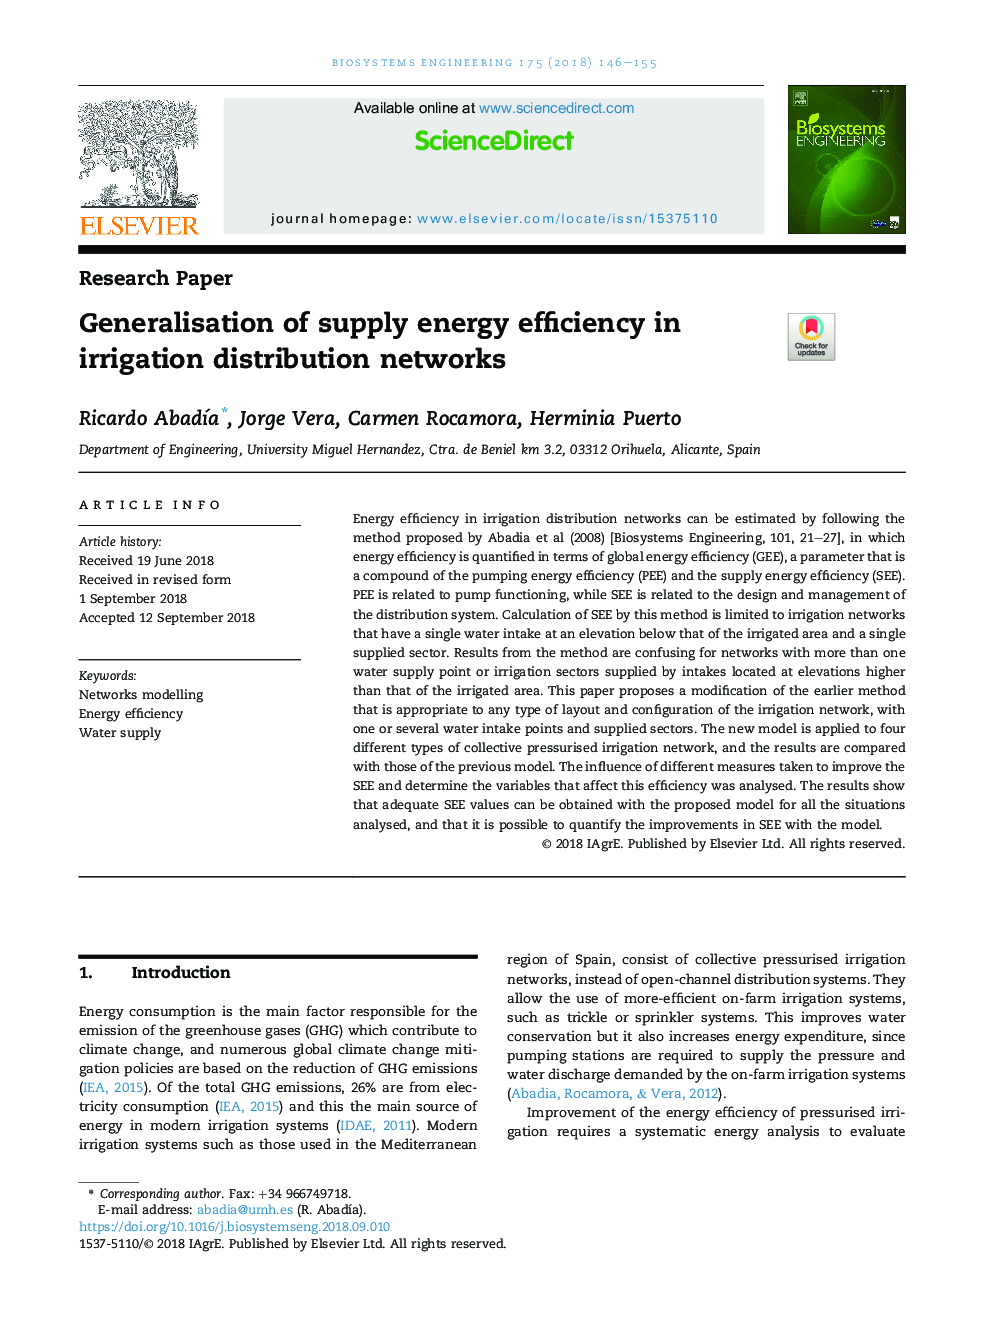 Generalisation of supply energy efficiency in irrigation distribution networks